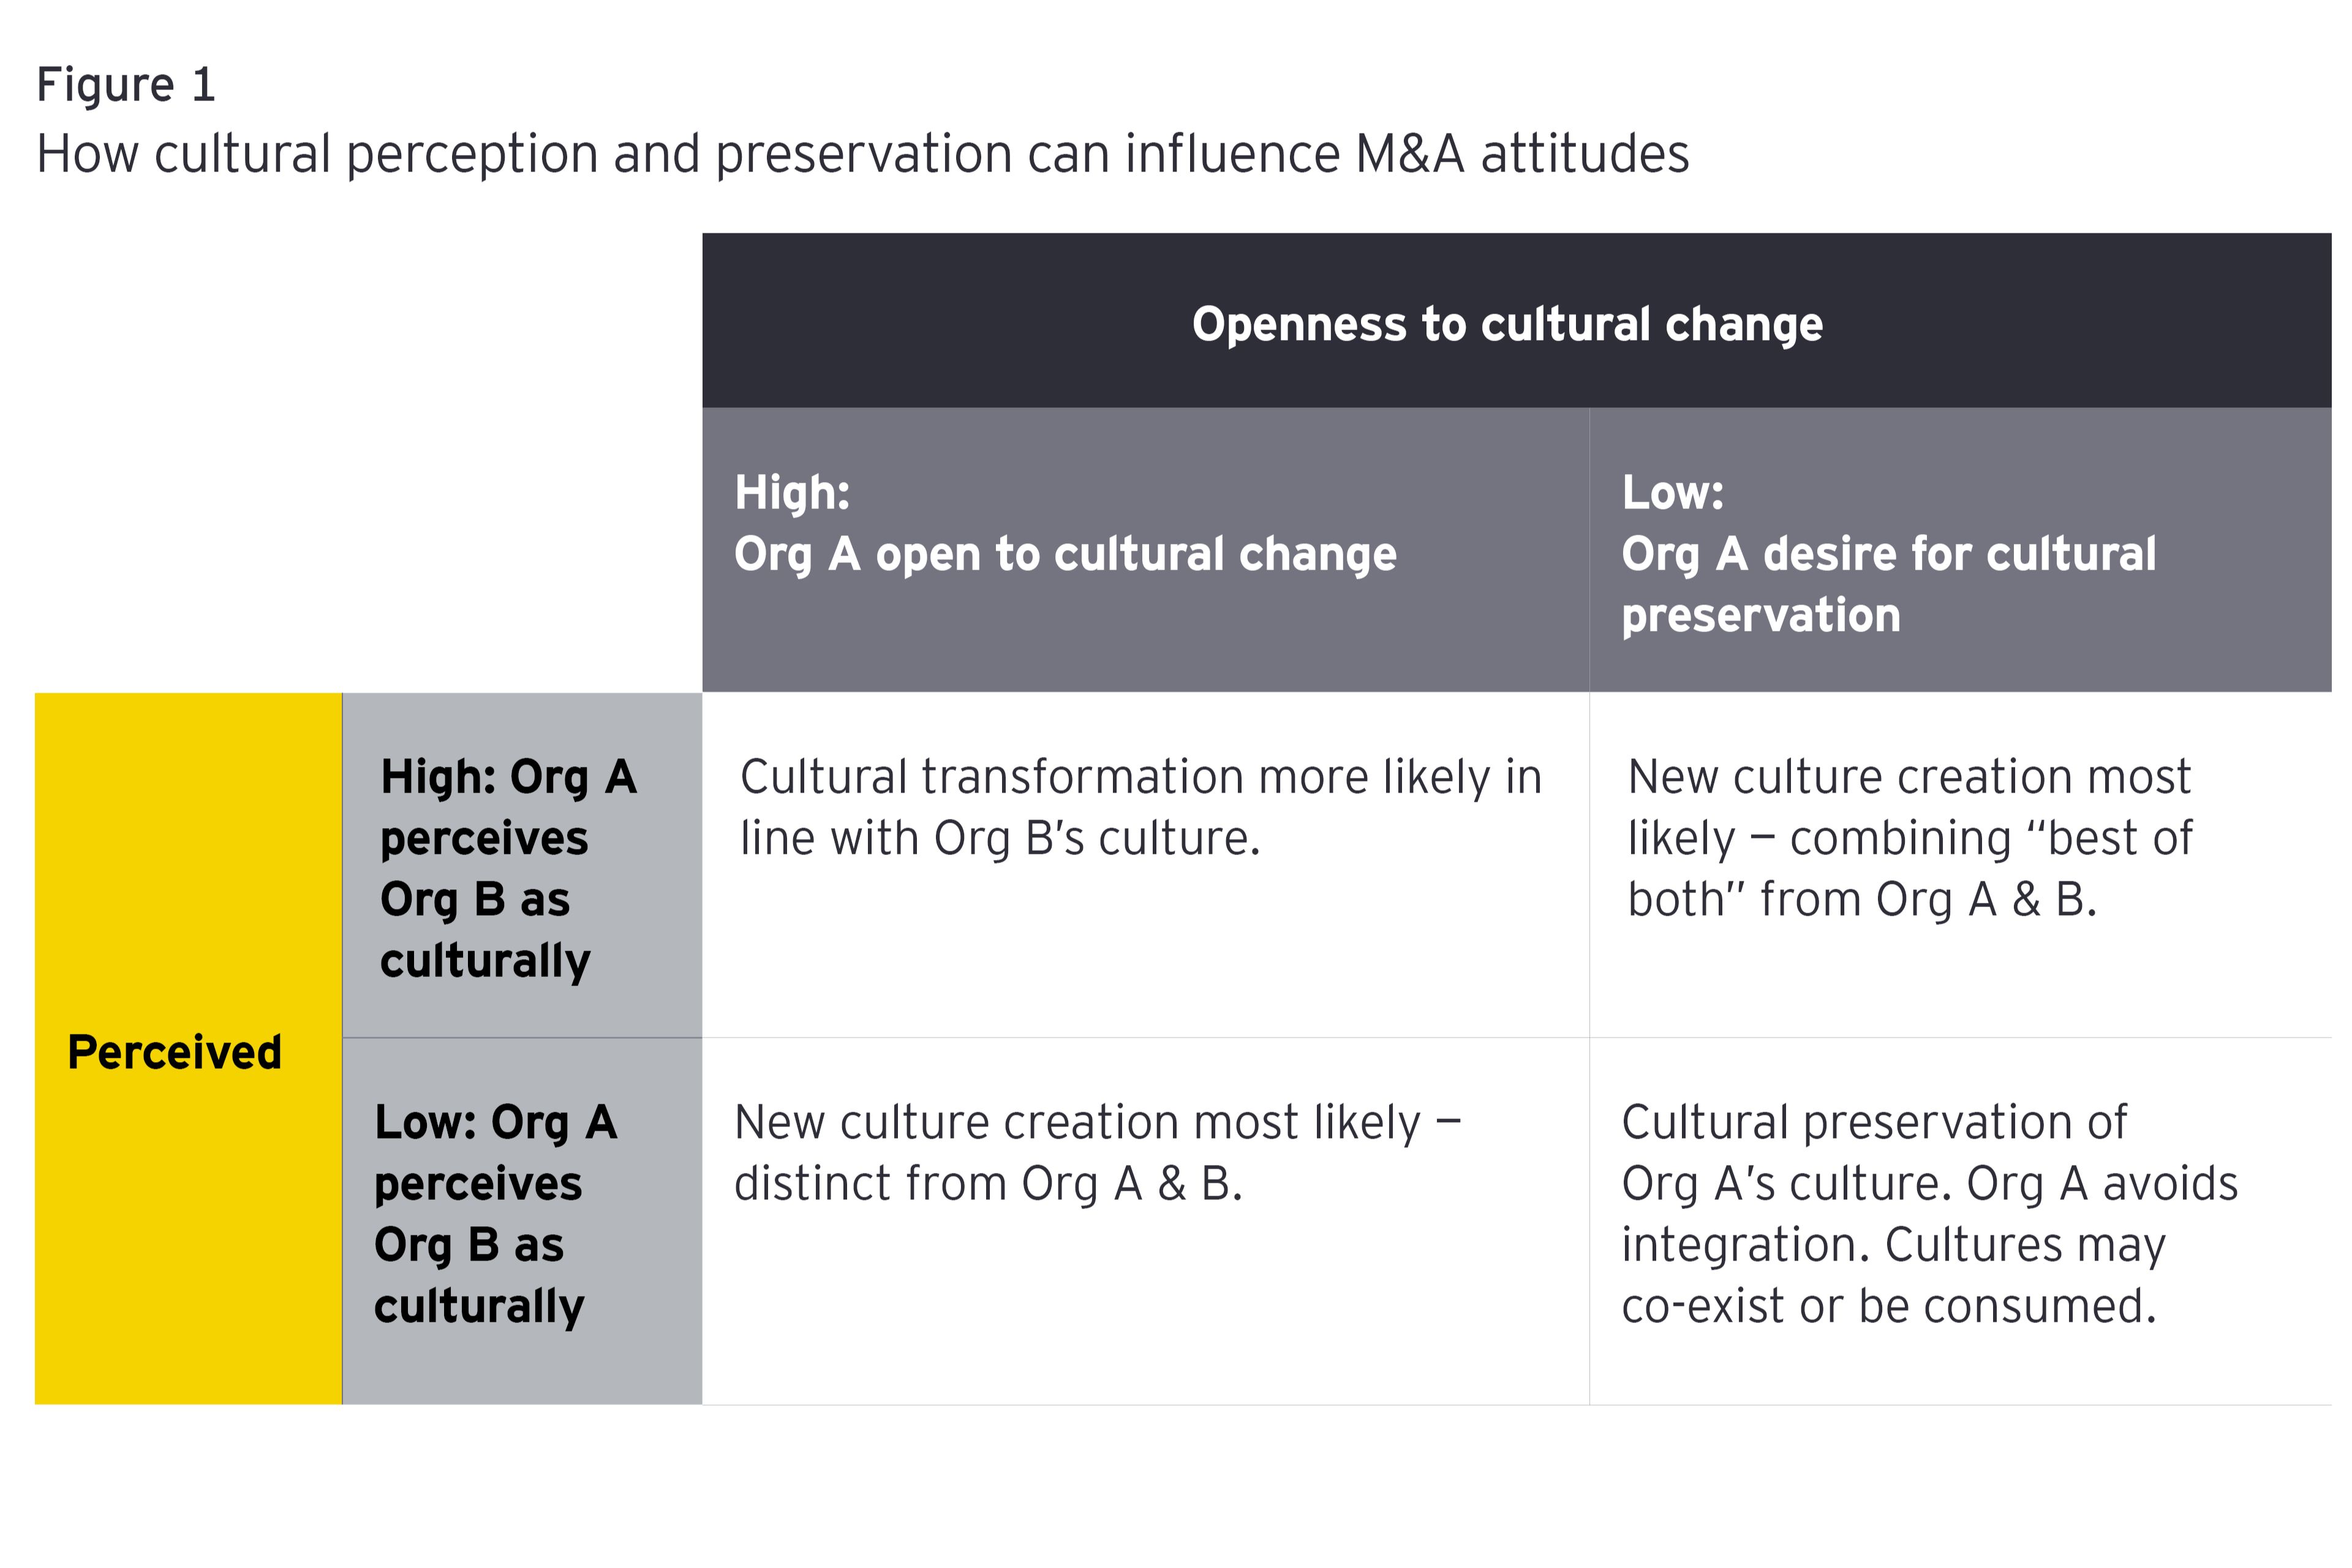 Openness to cultural change